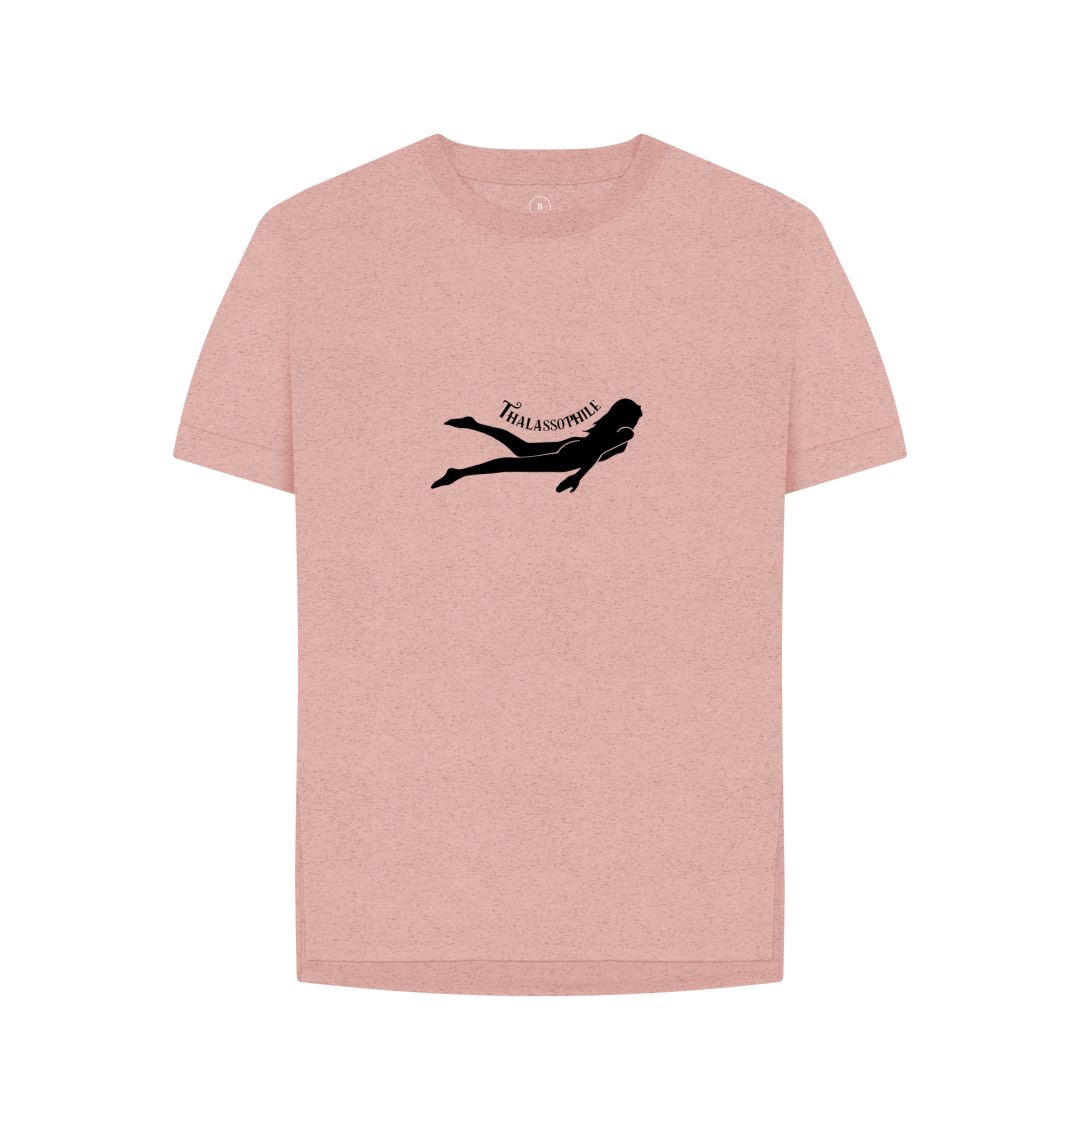 Sunset Pink 'THALASSOPHILE' Ladies Tee (Relaxed Fit)